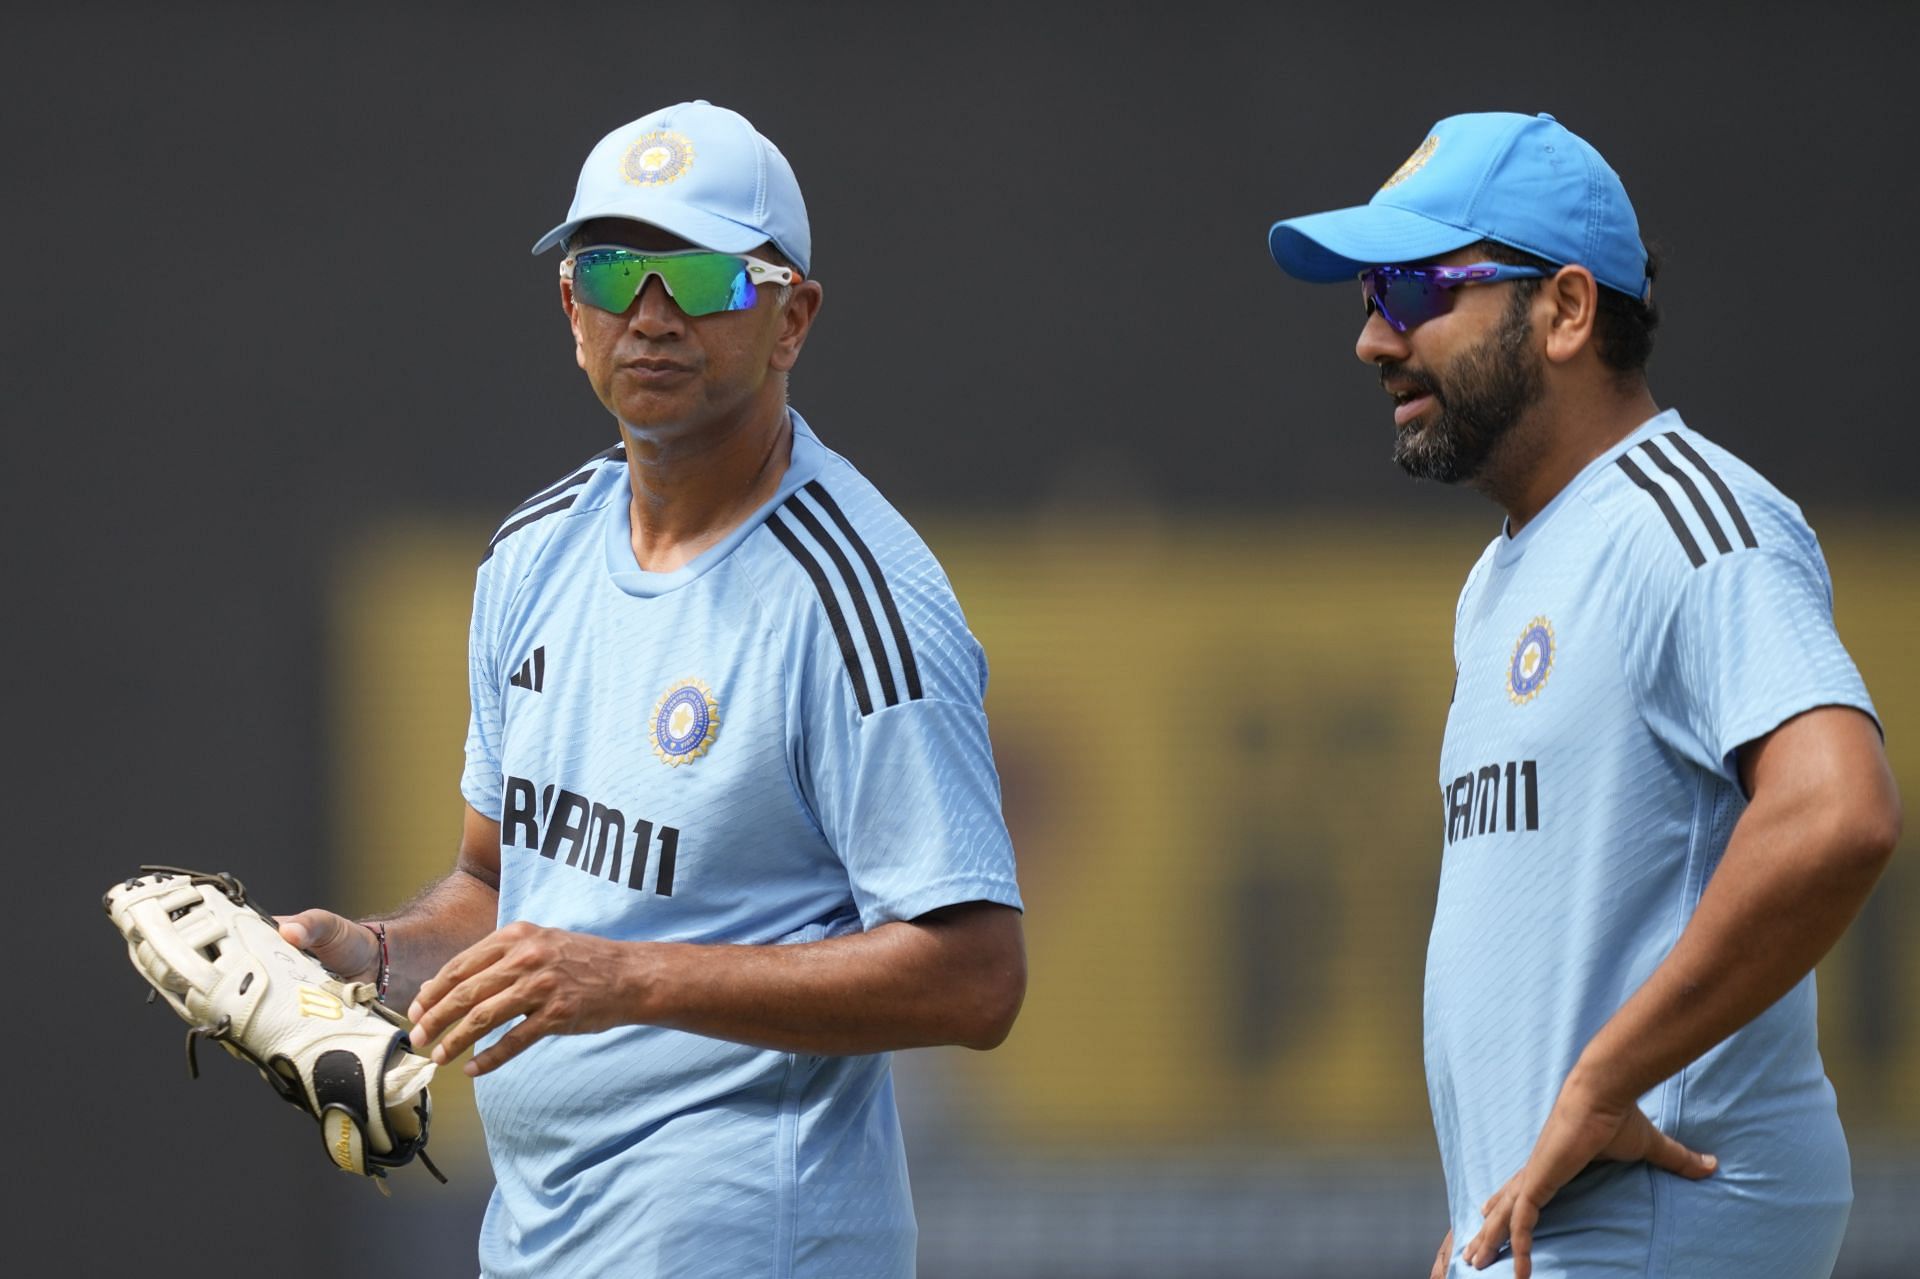 Rohit Sharma & Virat Kohli were rested by mutual consent: Rahul Dravid outlines India's line-up for first two ODIs vs Australia